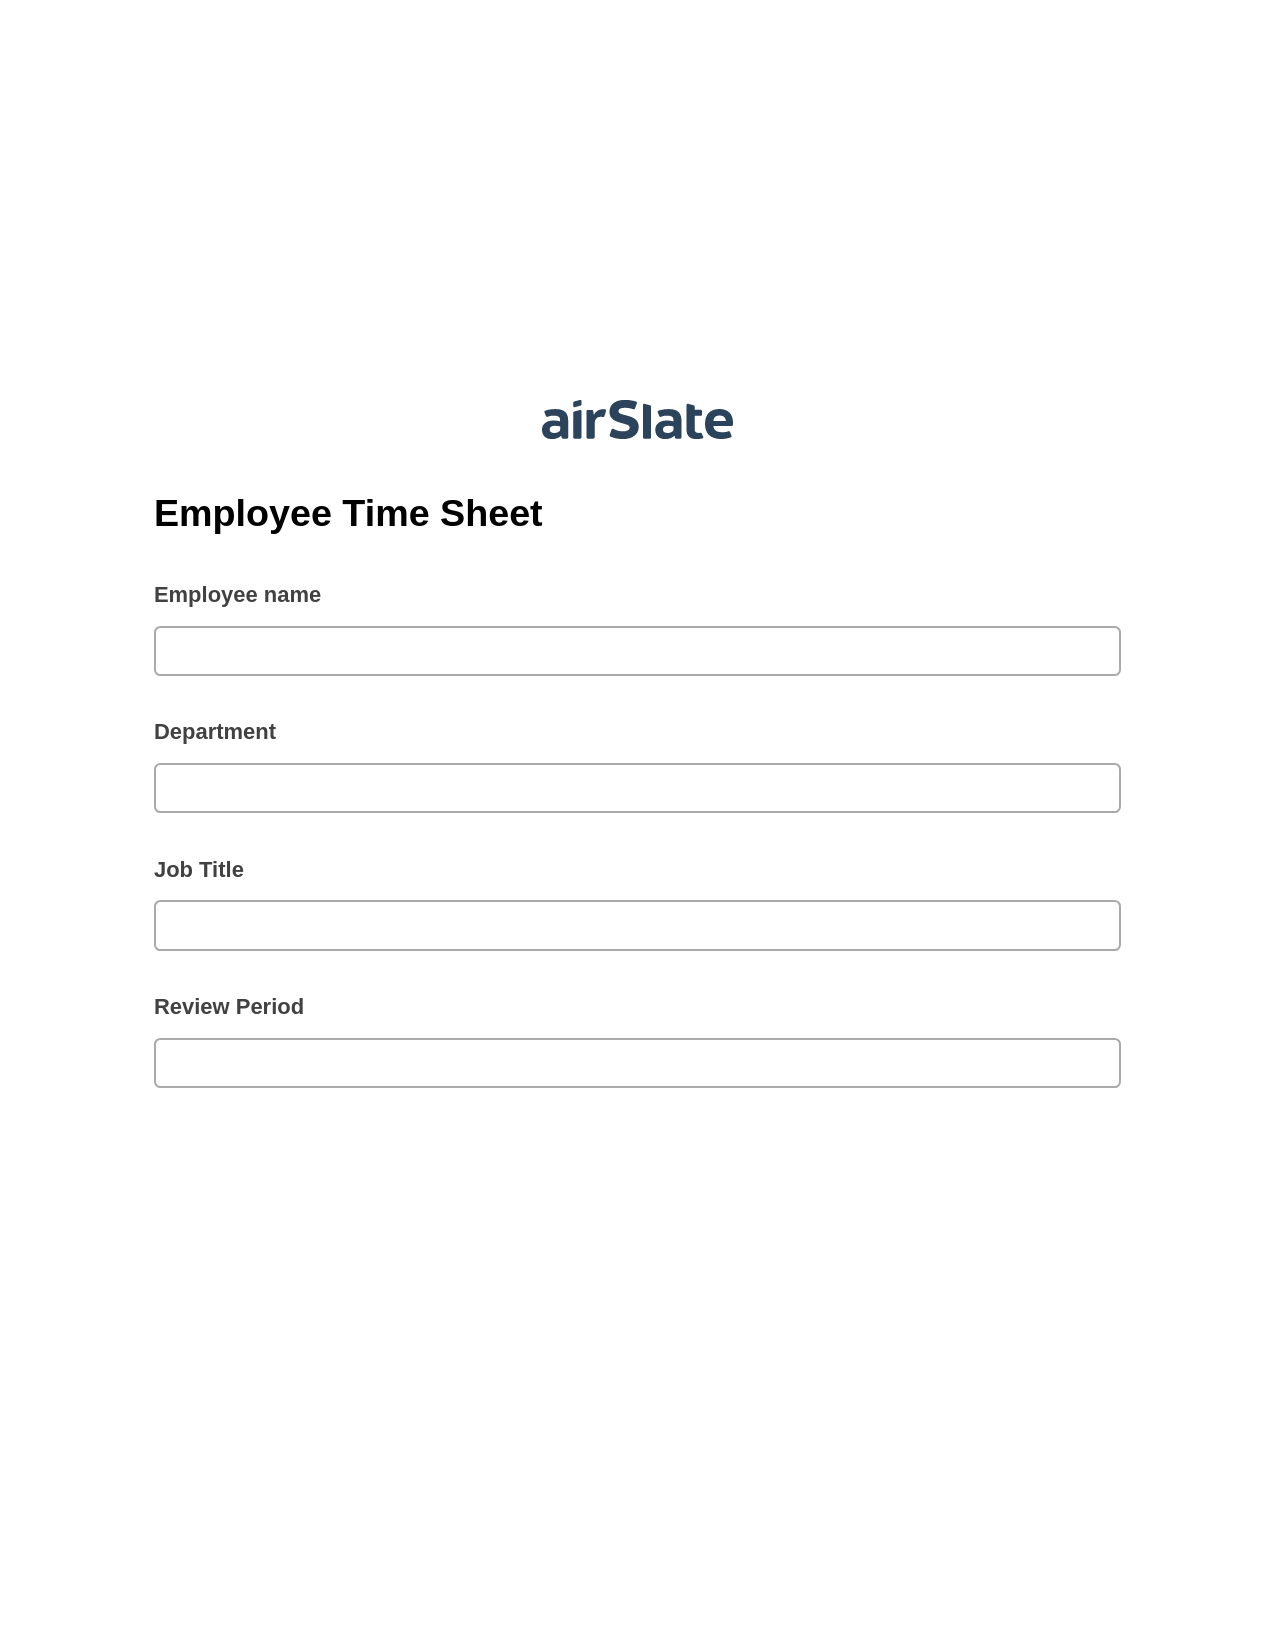 Employee Time Sheet Pre-fill Dropdowns from Excel Bot, Create Salesforce Records Bot, Archive to Dropbox Bot